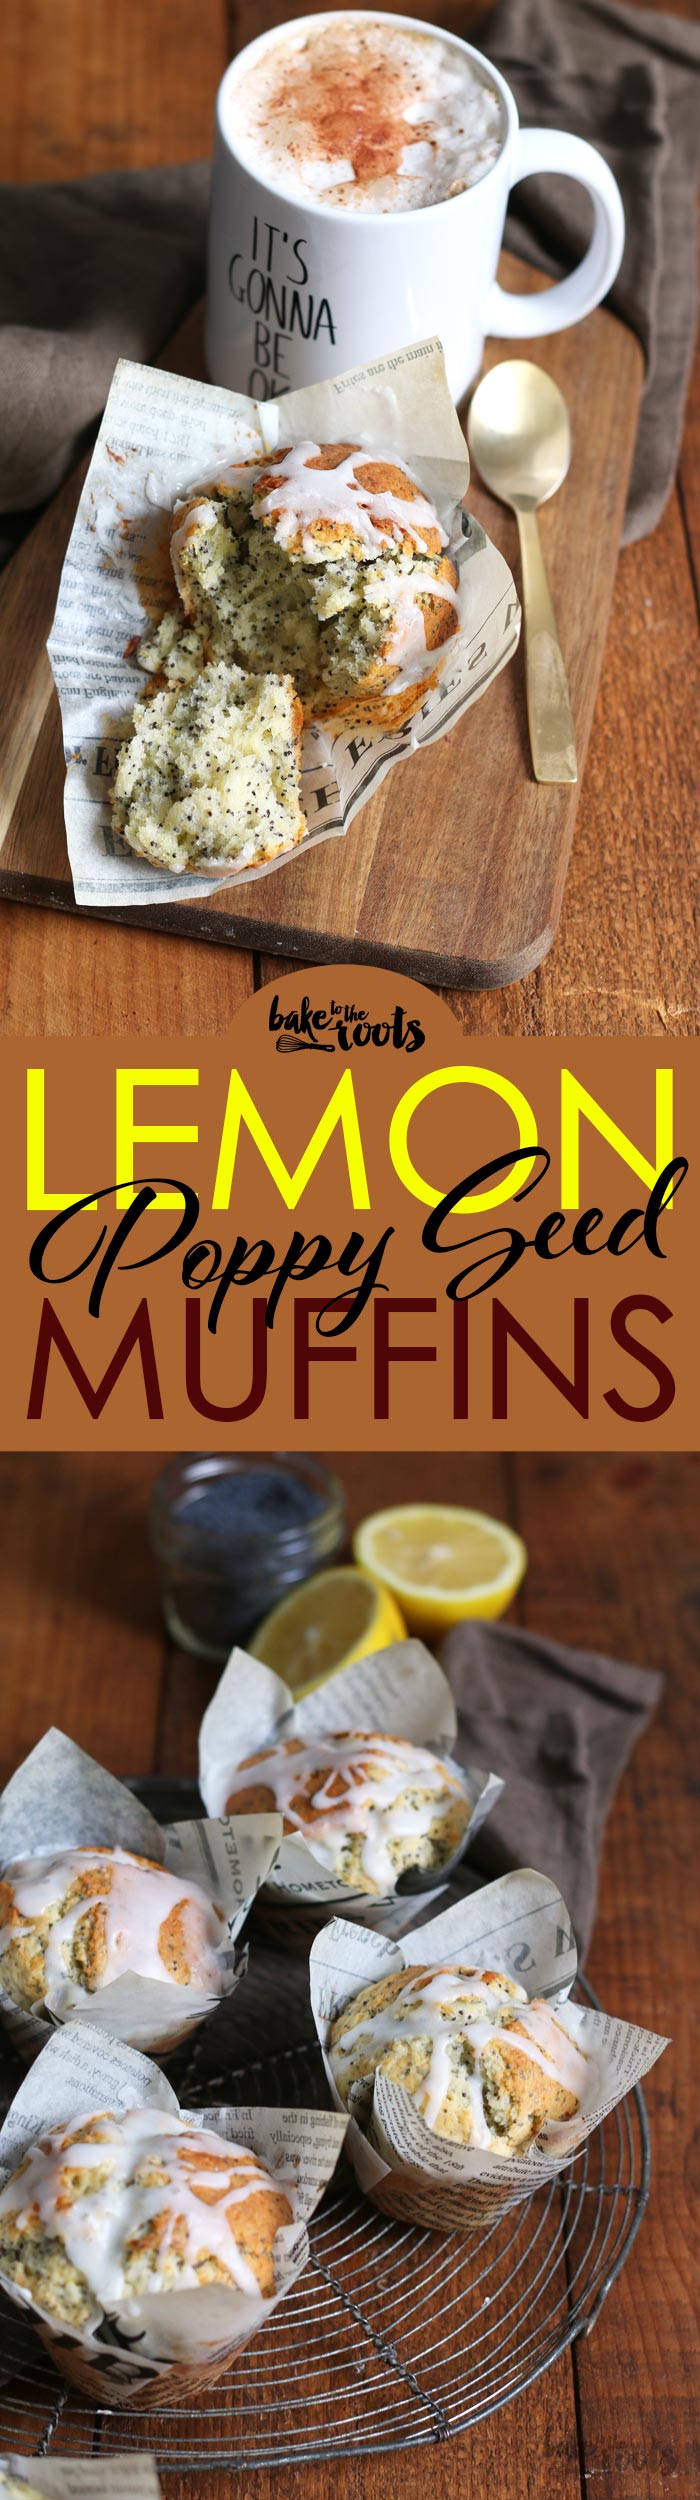 Delicious coffee house style Lemon Poppy Seed Muffins | Bake to the roots